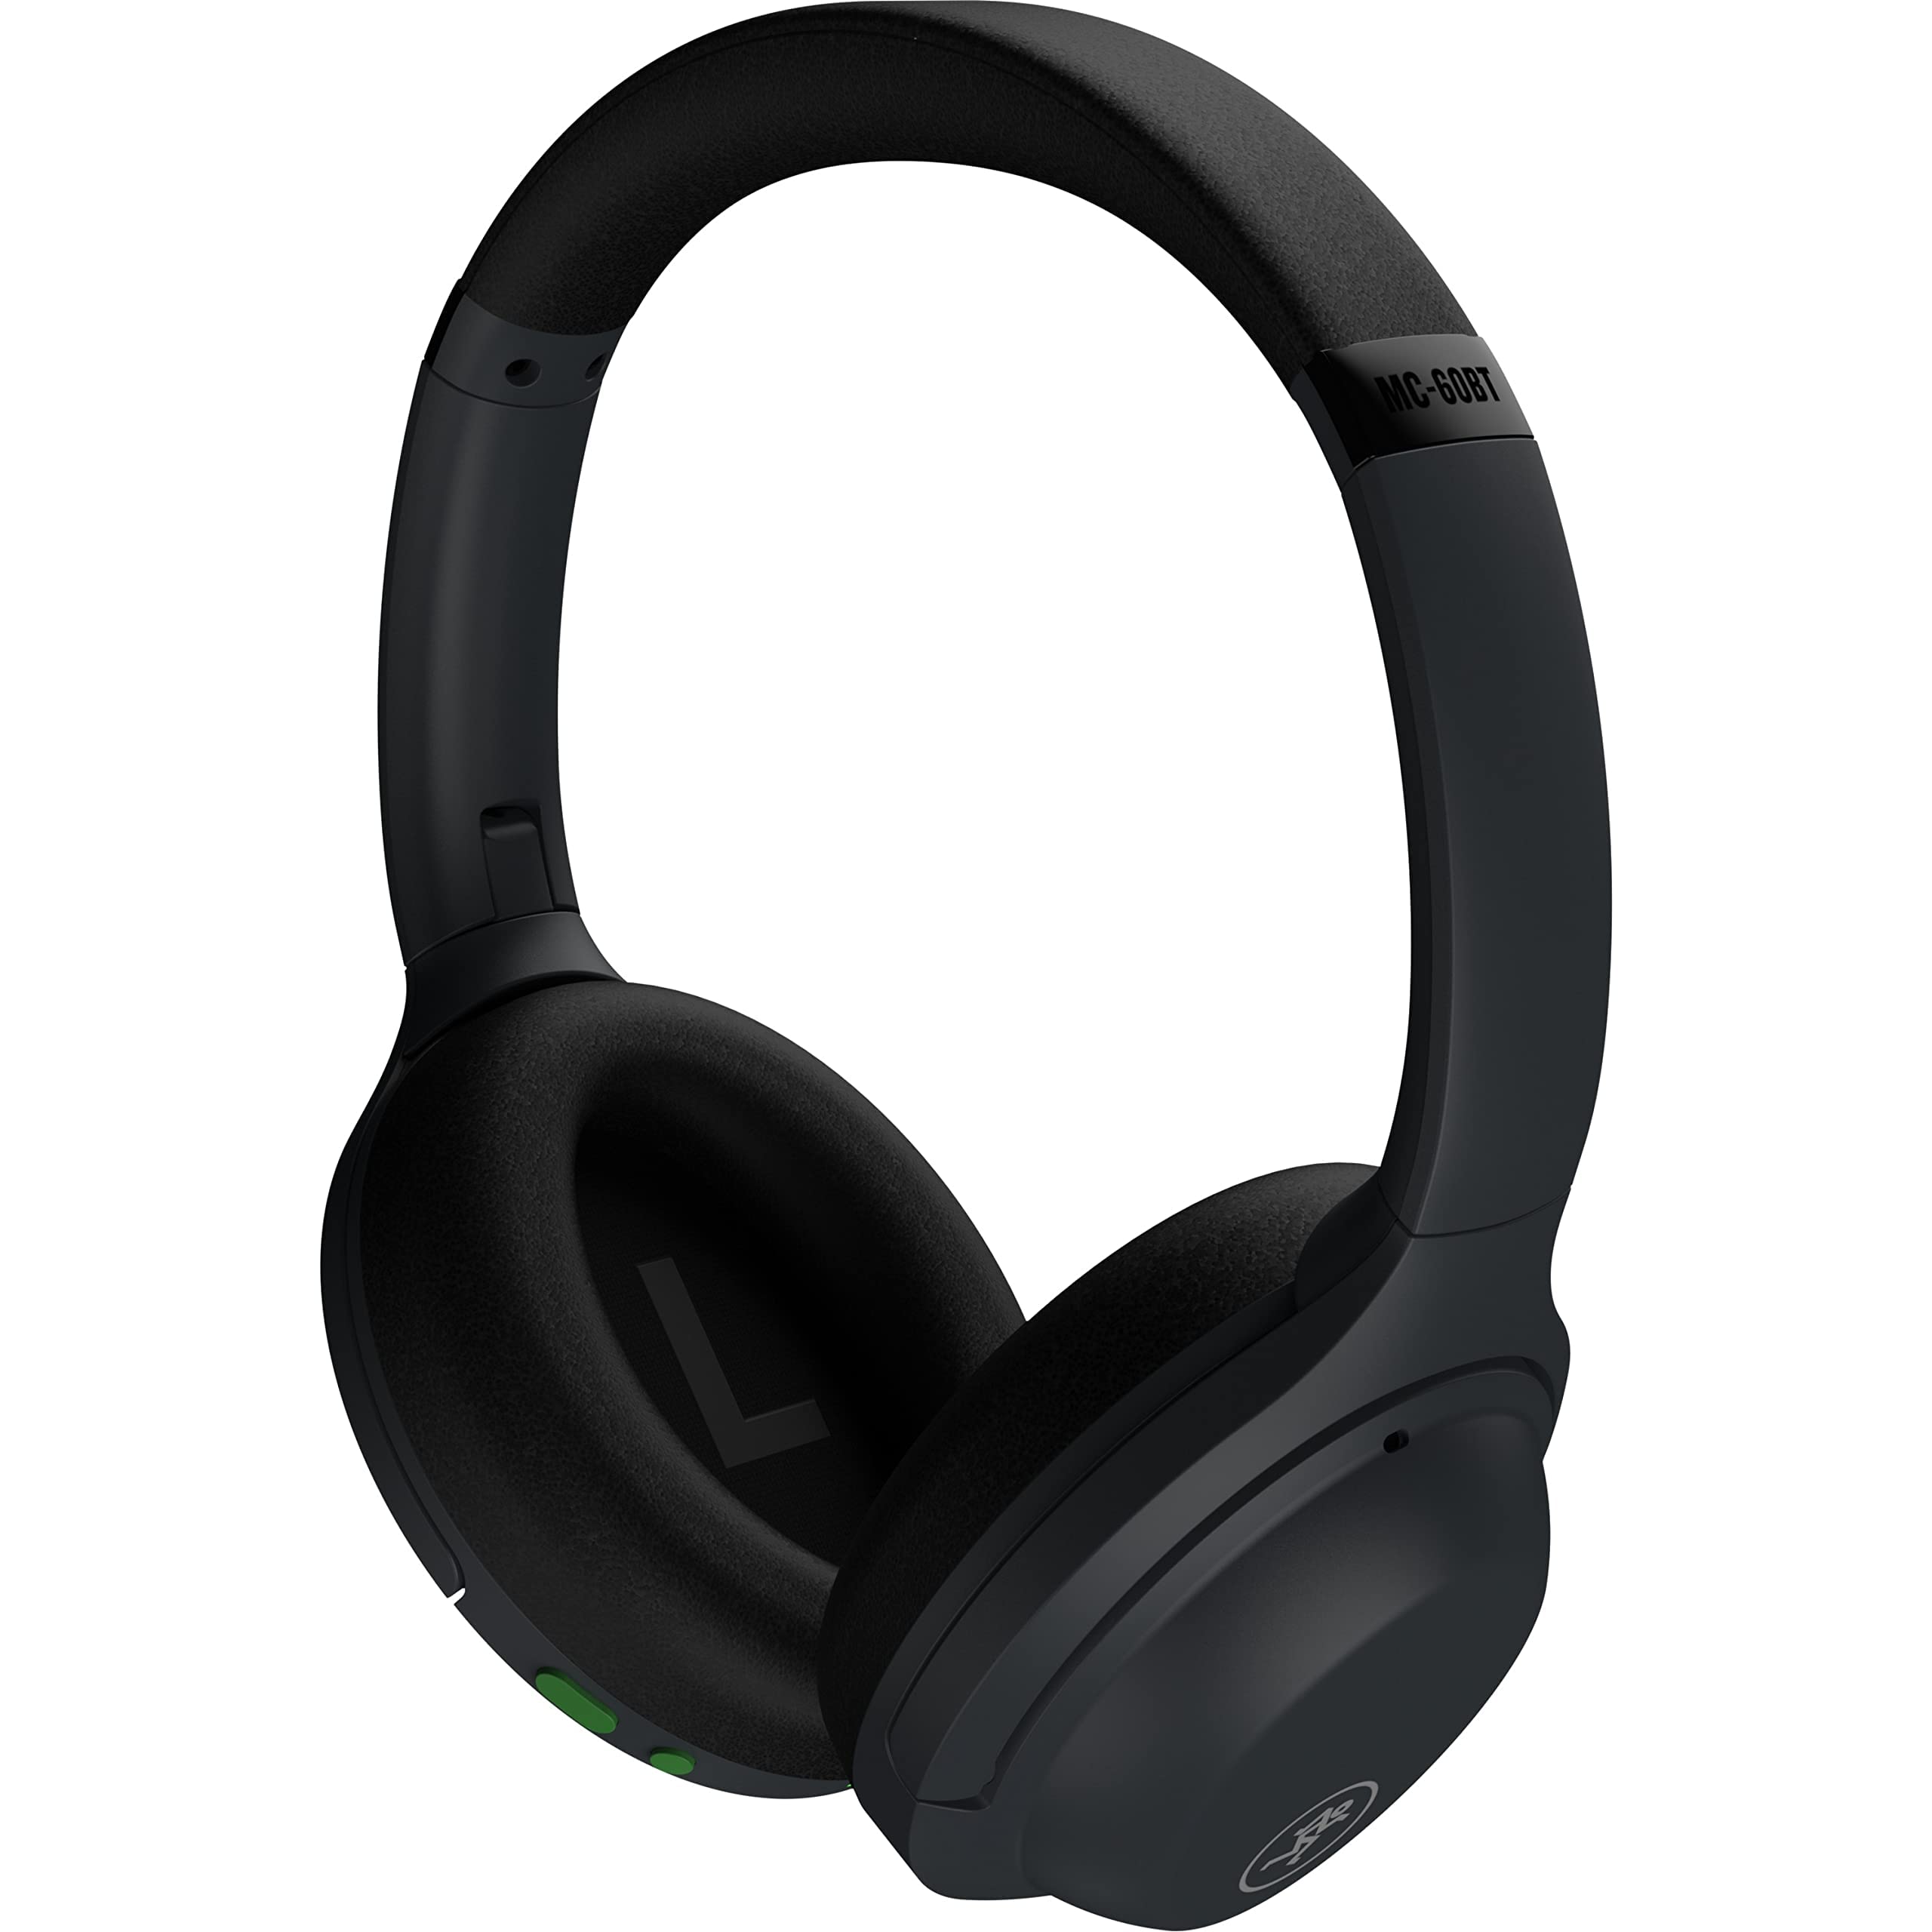 Mackie MC60-BT - Bluetooth Wireless Noise Canceling Headphones with Wireless Charging Pad